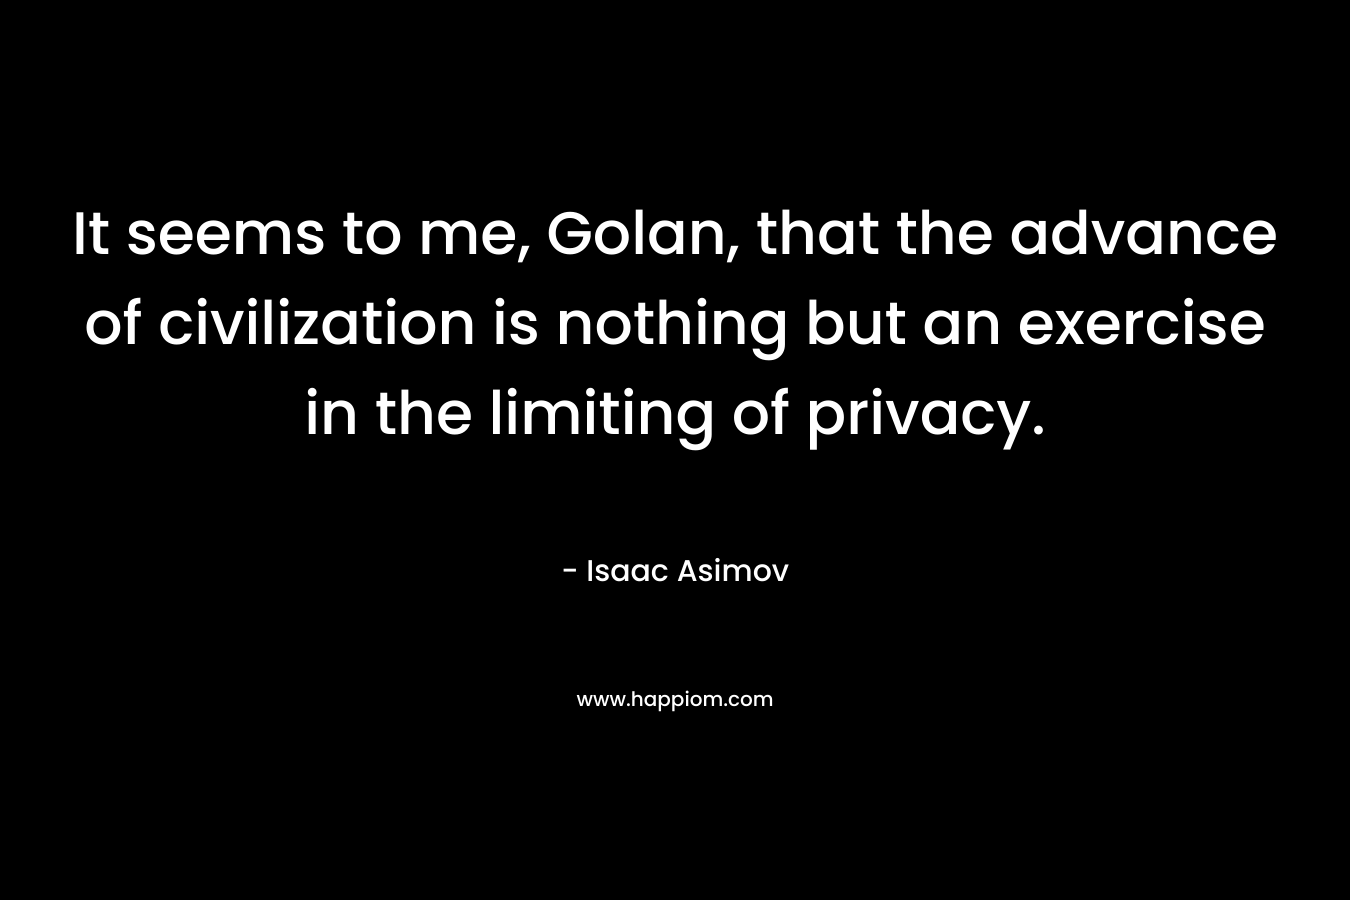 It seems to me, Golan, that the advance of civilization is nothing but an exercise in the limiting of privacy. – Isaac Asimov